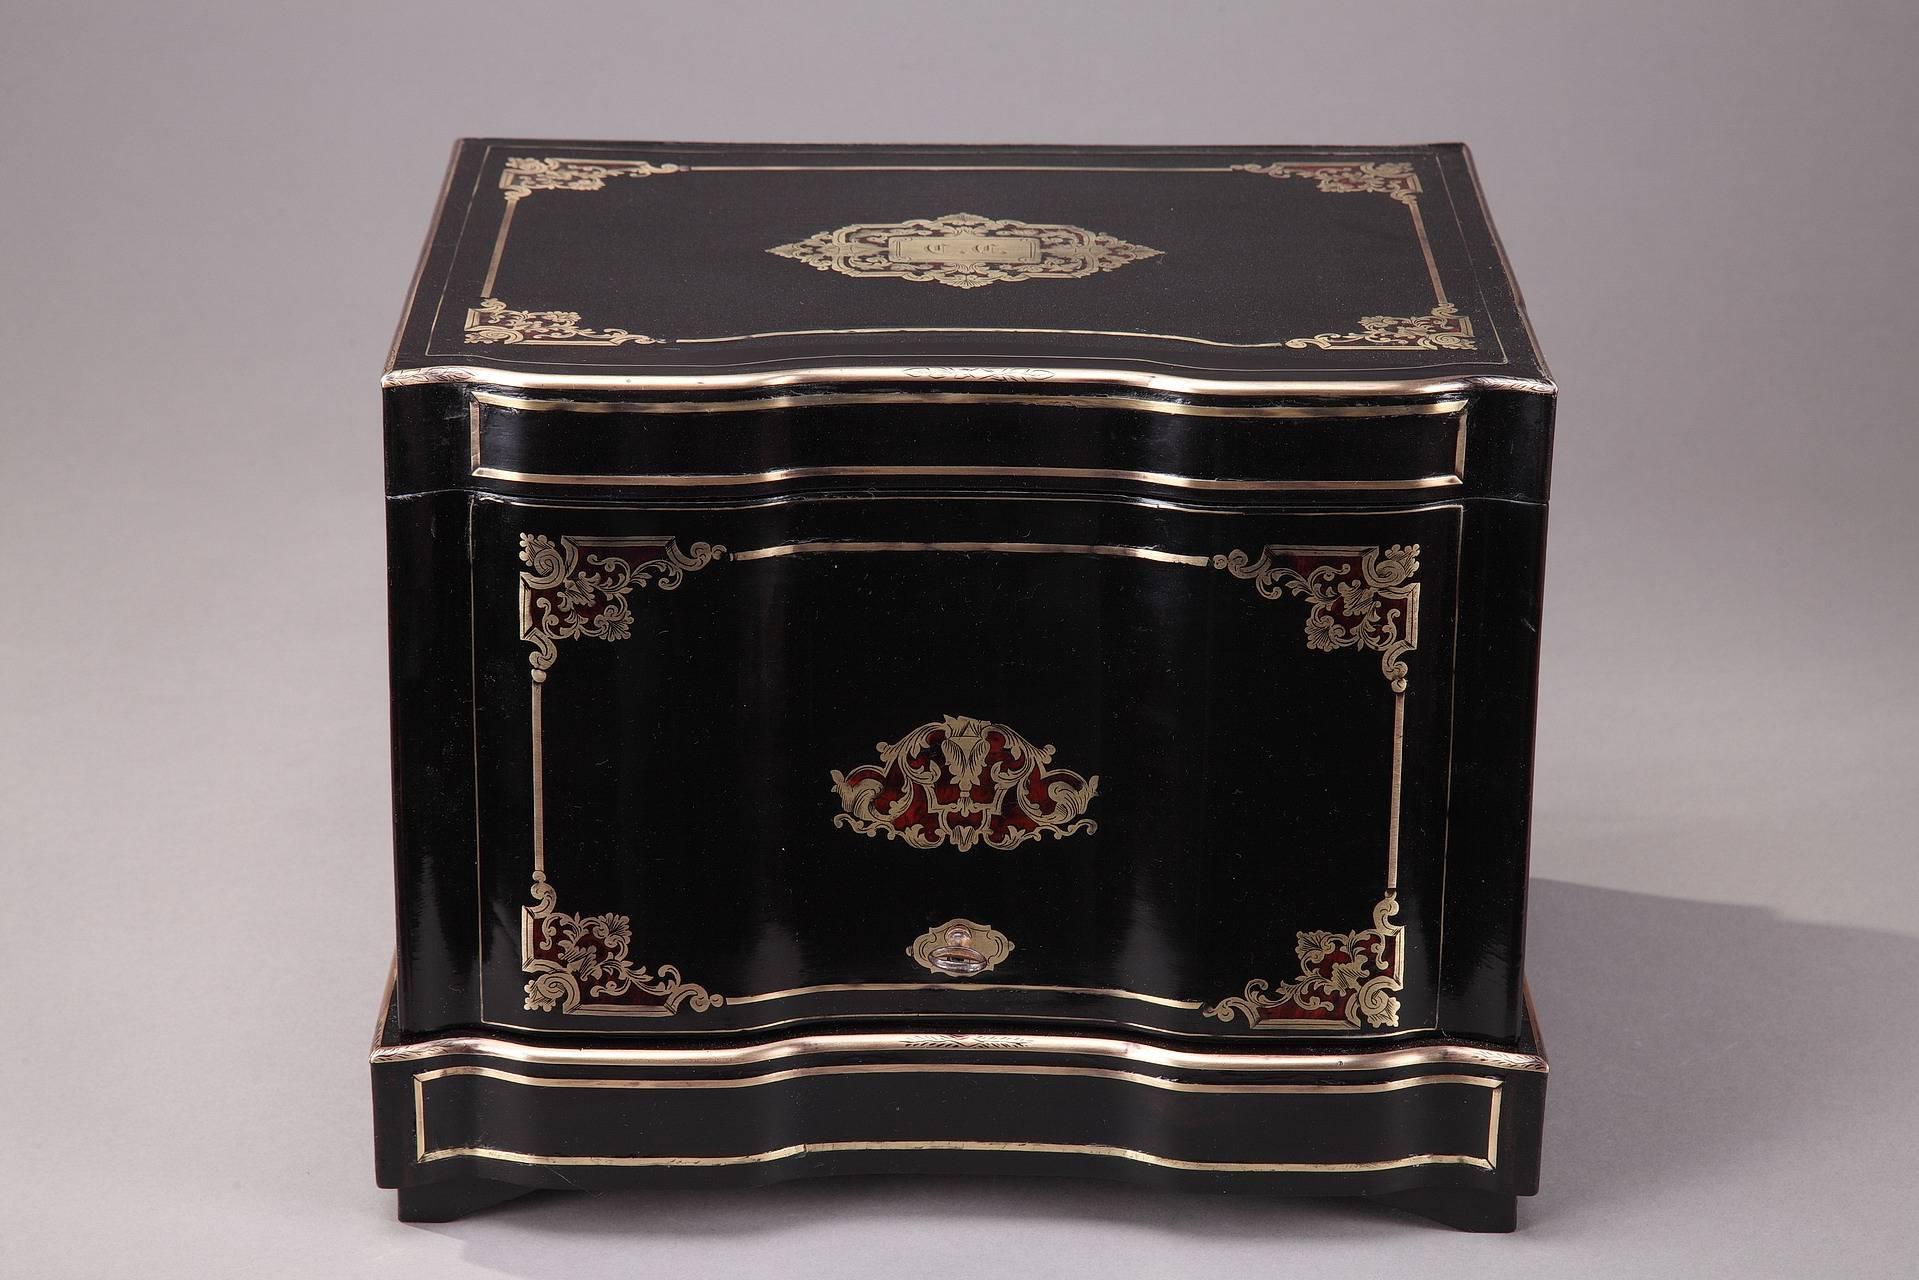 Liquor cellar in brass inlaid ebony with crystal glassware. The top of the box is engraved with the initials of the owner. Front and top sides are decorated with golden rinceau, foliages and interlacing. The interior is provided with a removable